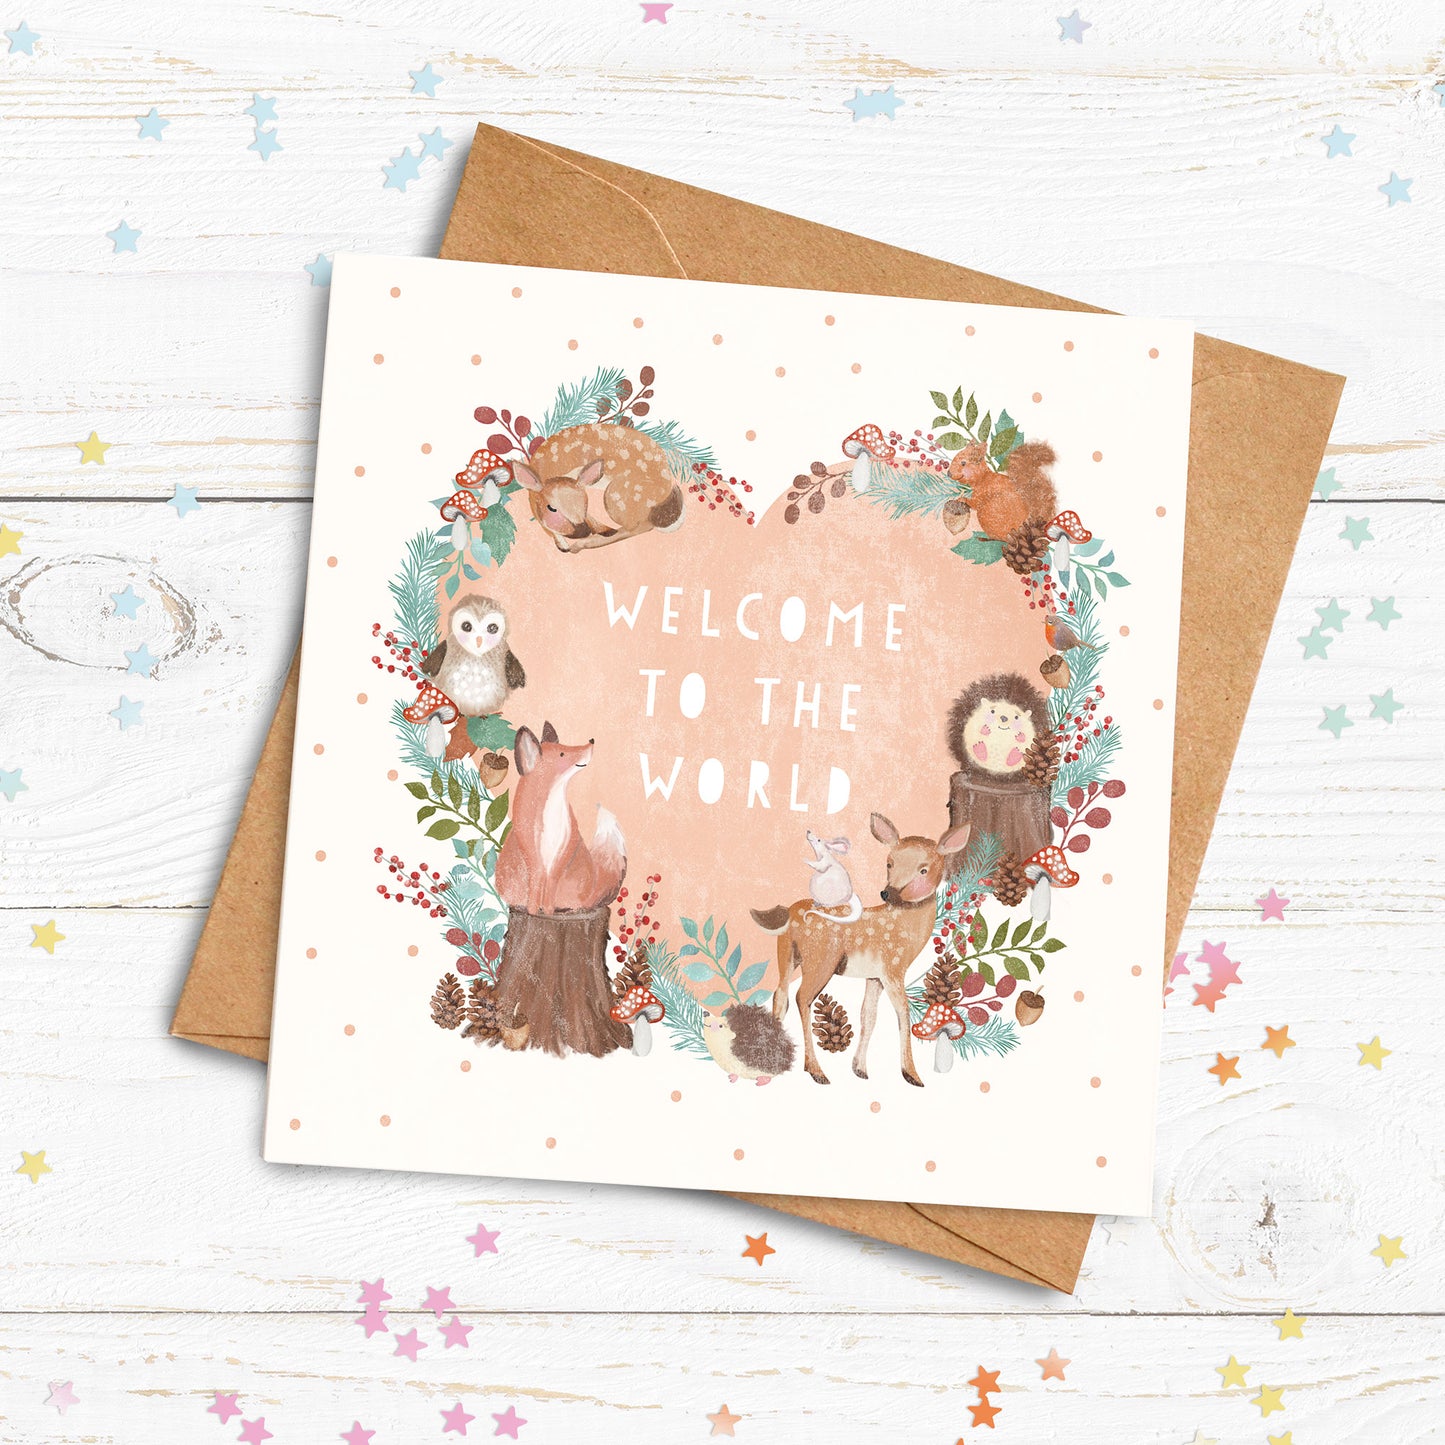 Personalised Welcome to the World Woodland Heart Card. New Baby Card. Cute Woodland Card. Send Direct Option.